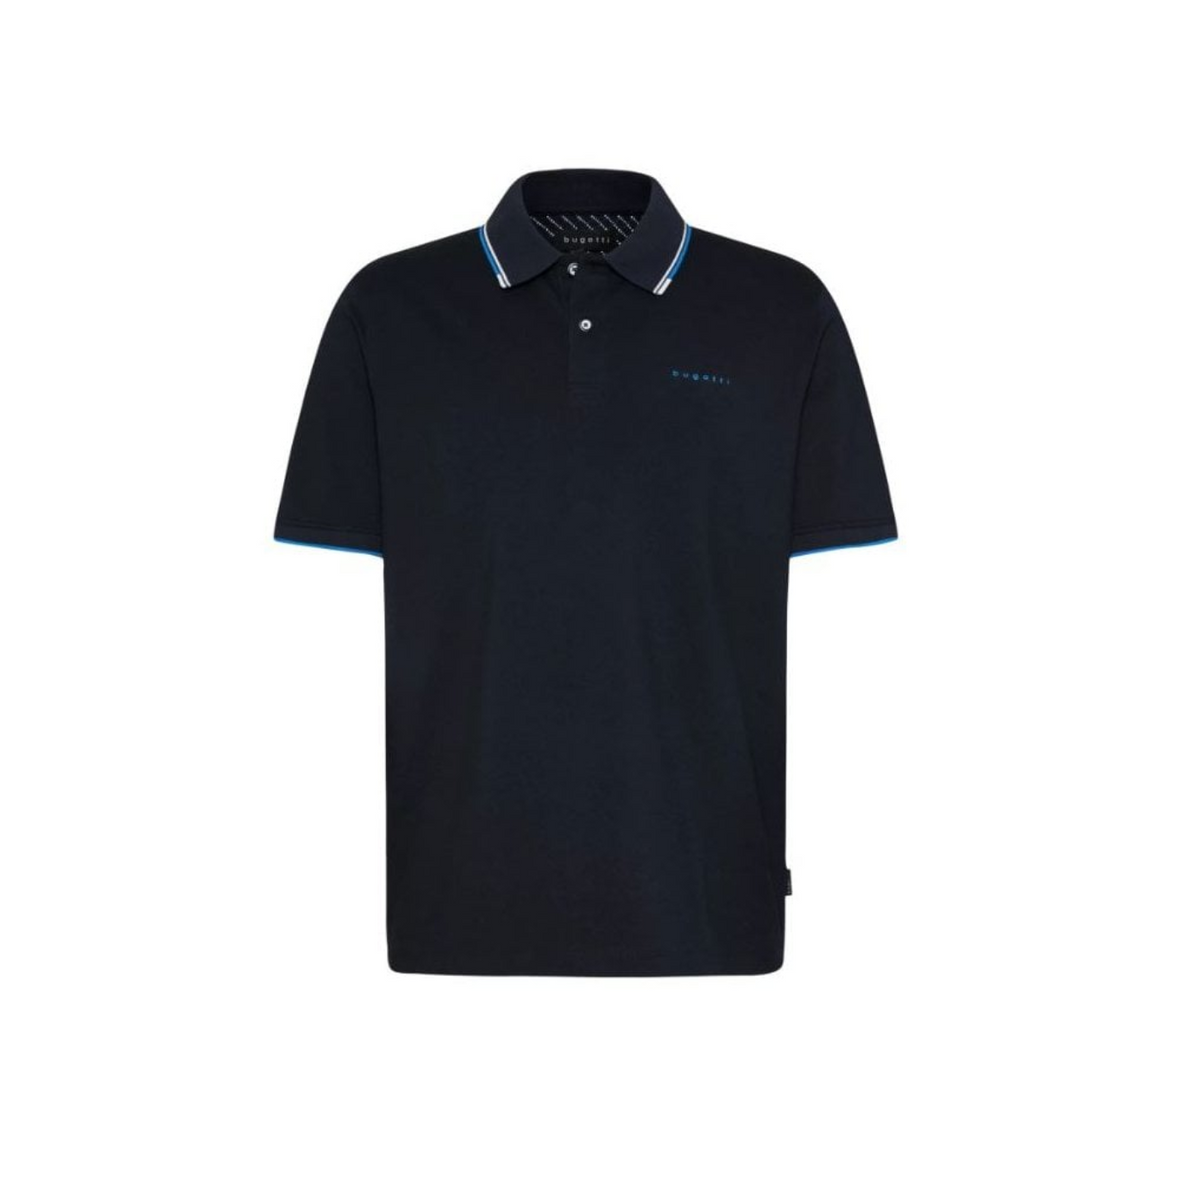 Face side of the polo shirt 